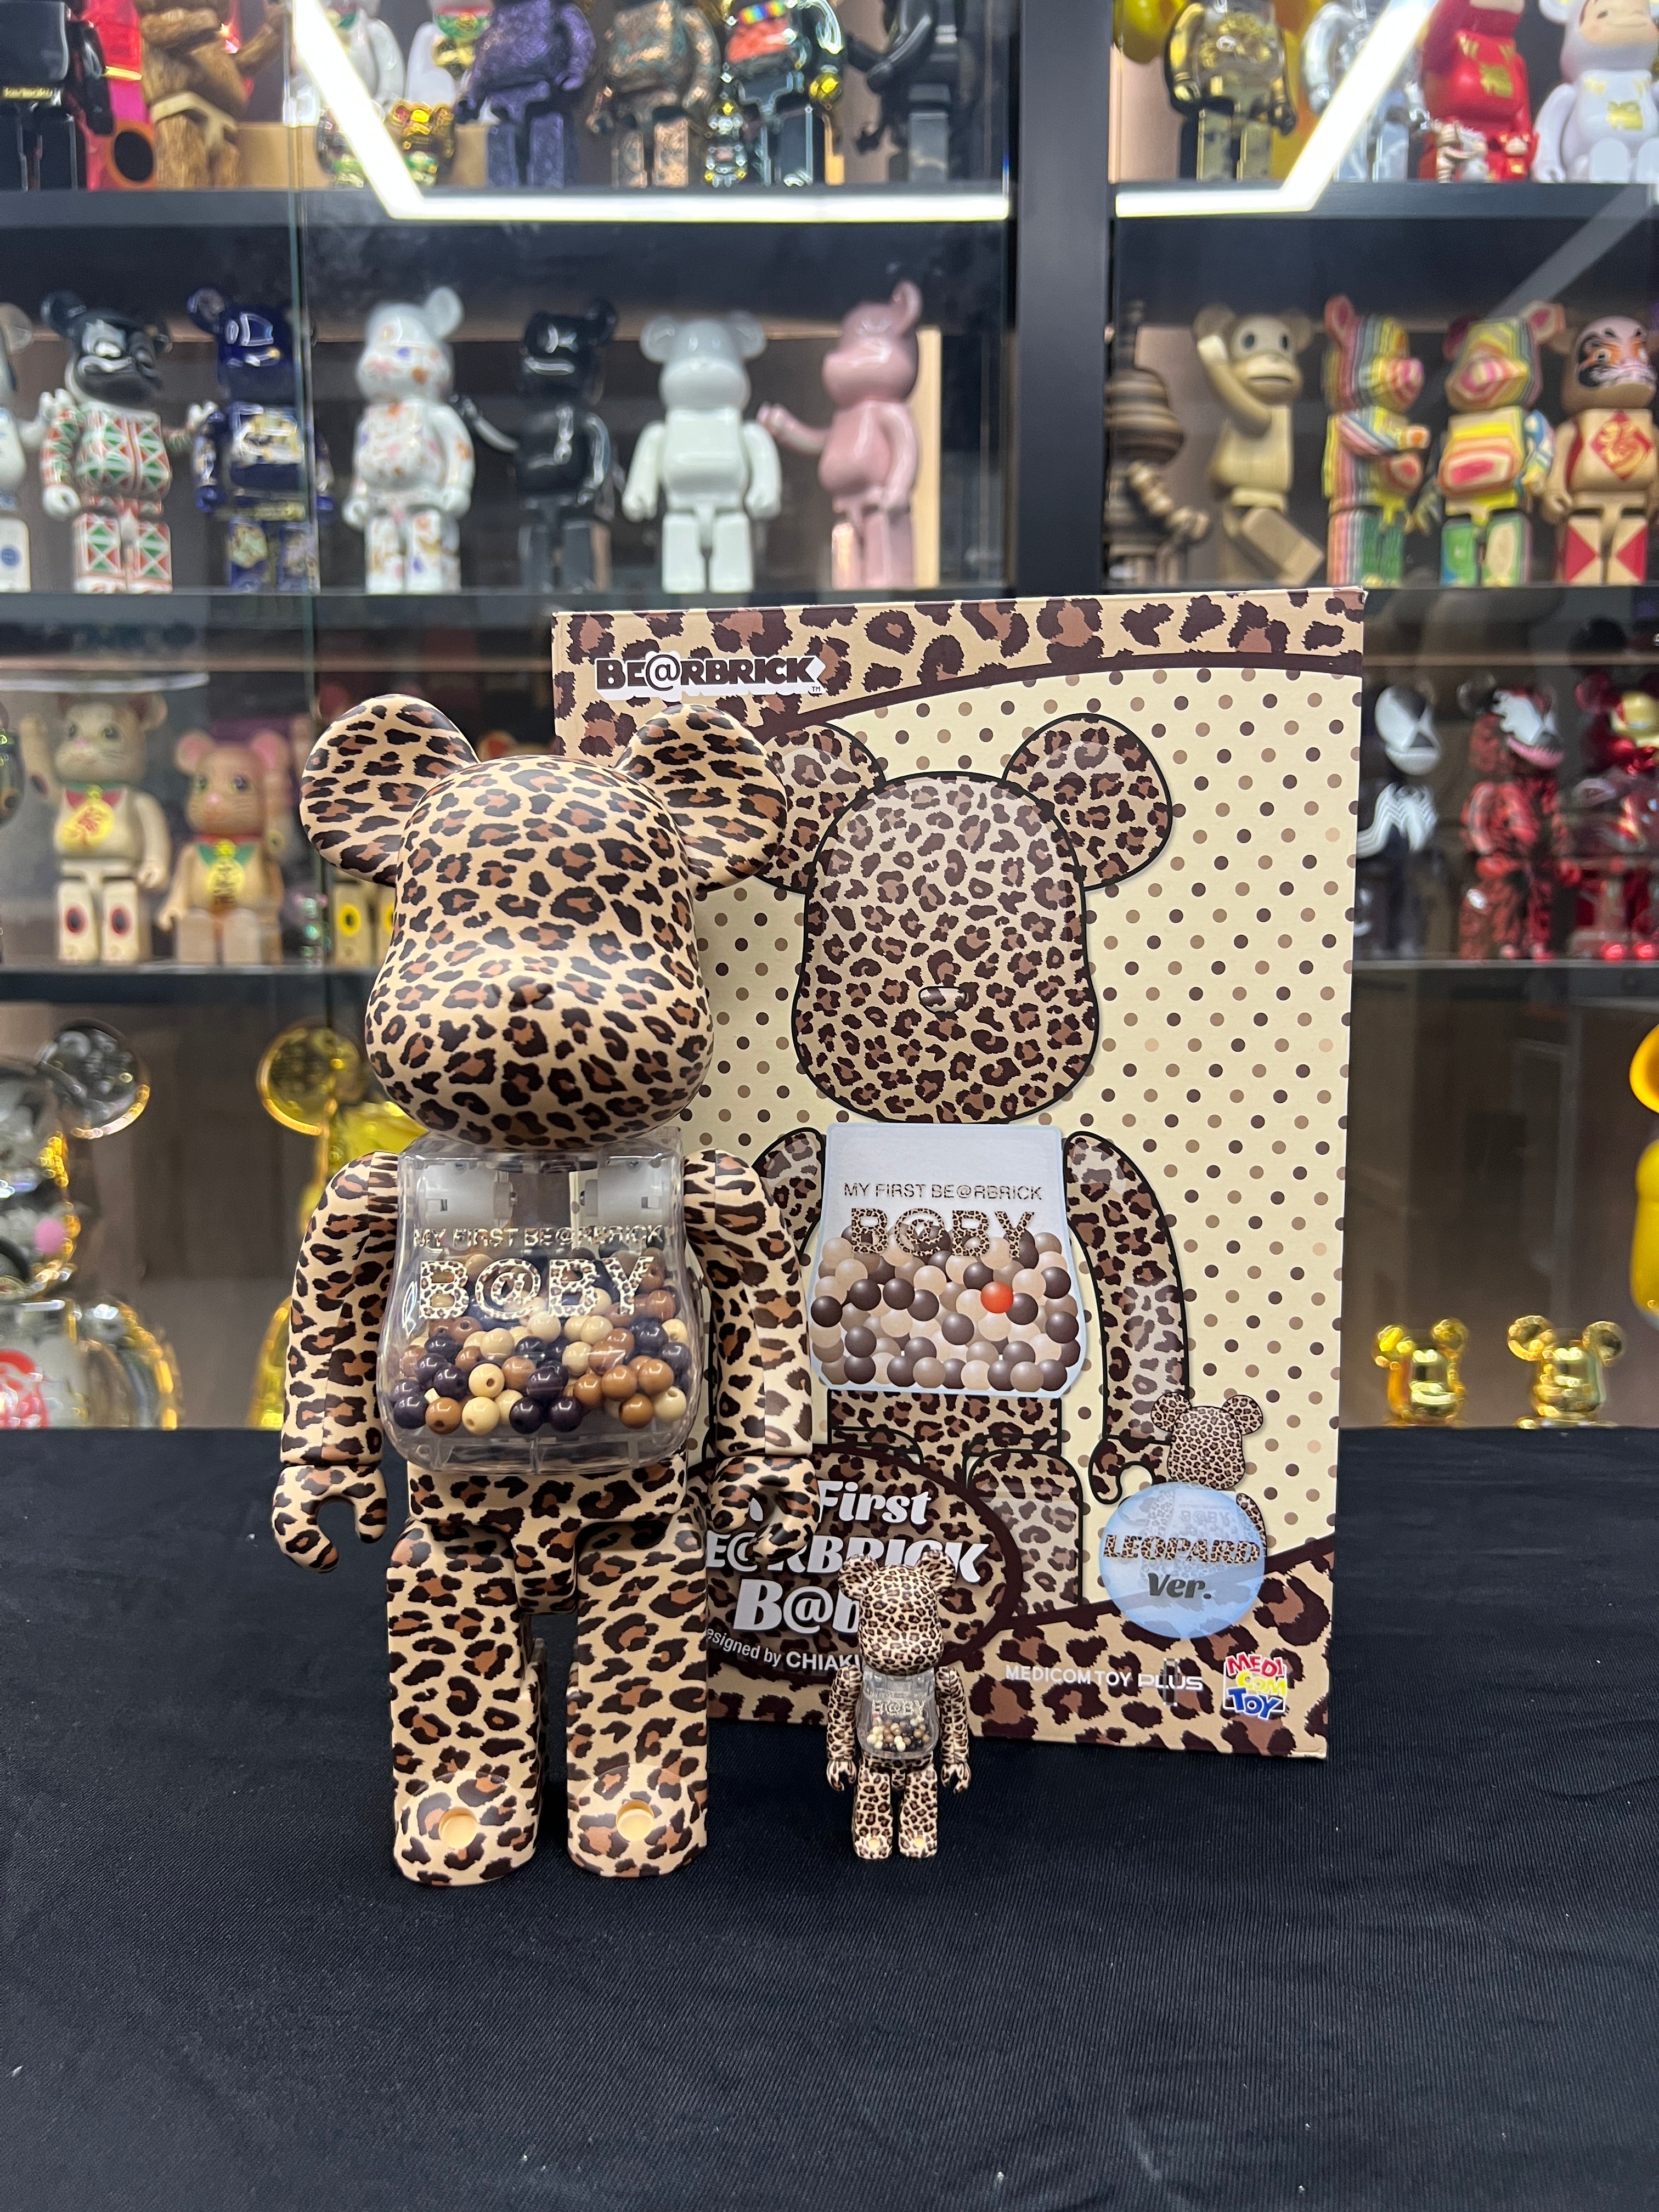 MY FIRST BE@RBRICK B@BY LEOPARD 100%&400 - フィギュア